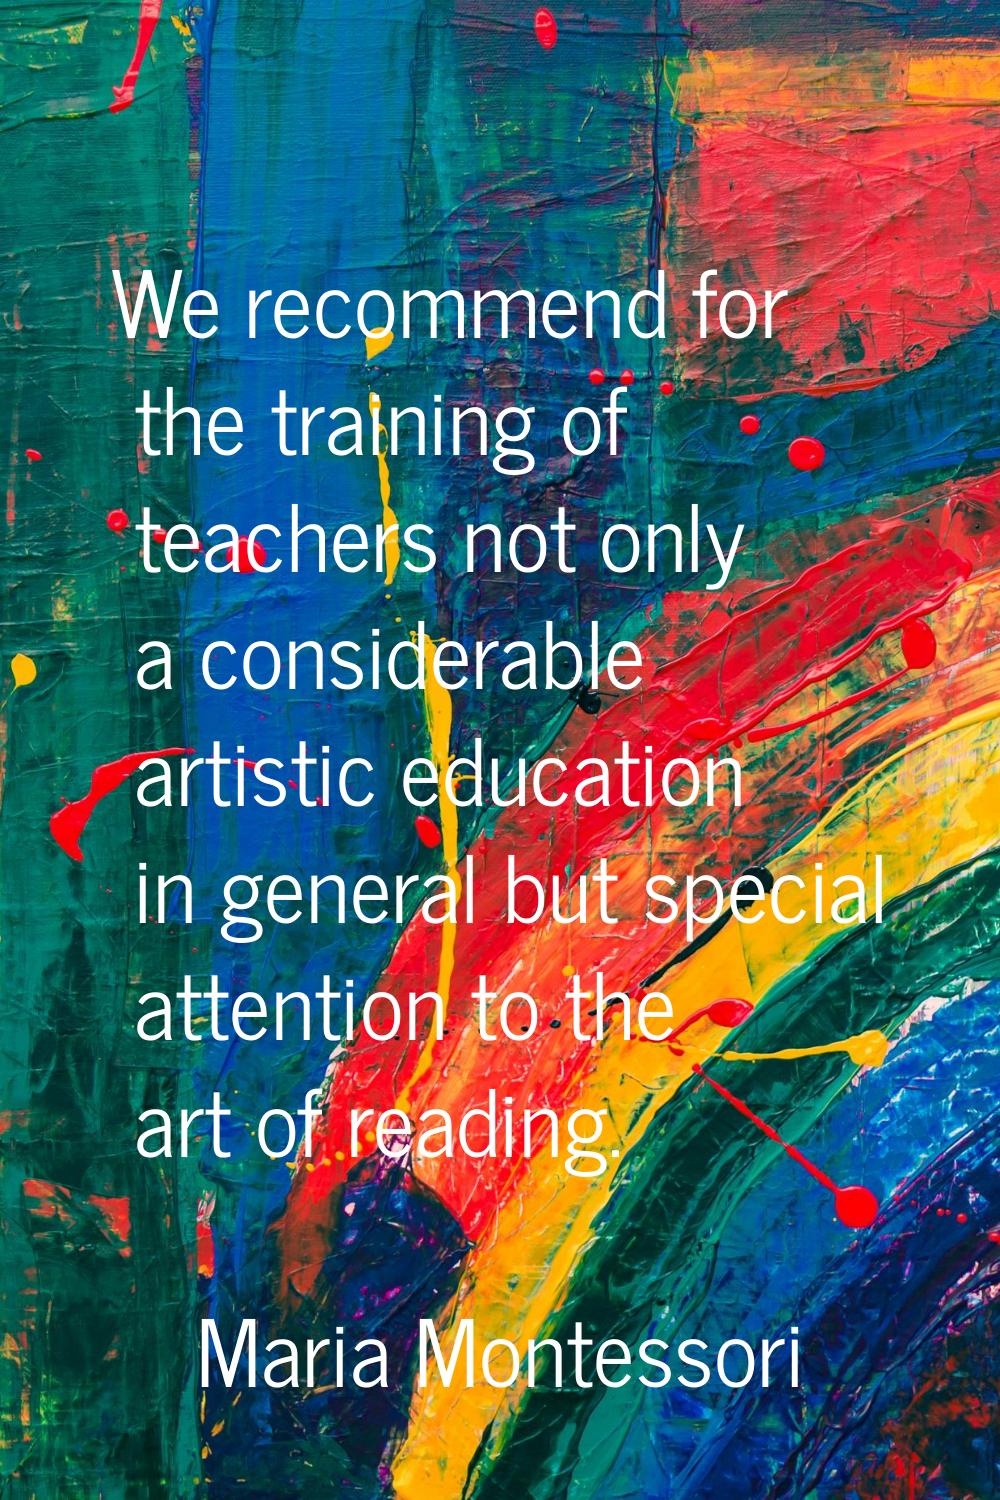 We recommend for the training of teachers not only a considerable artistic education in general but